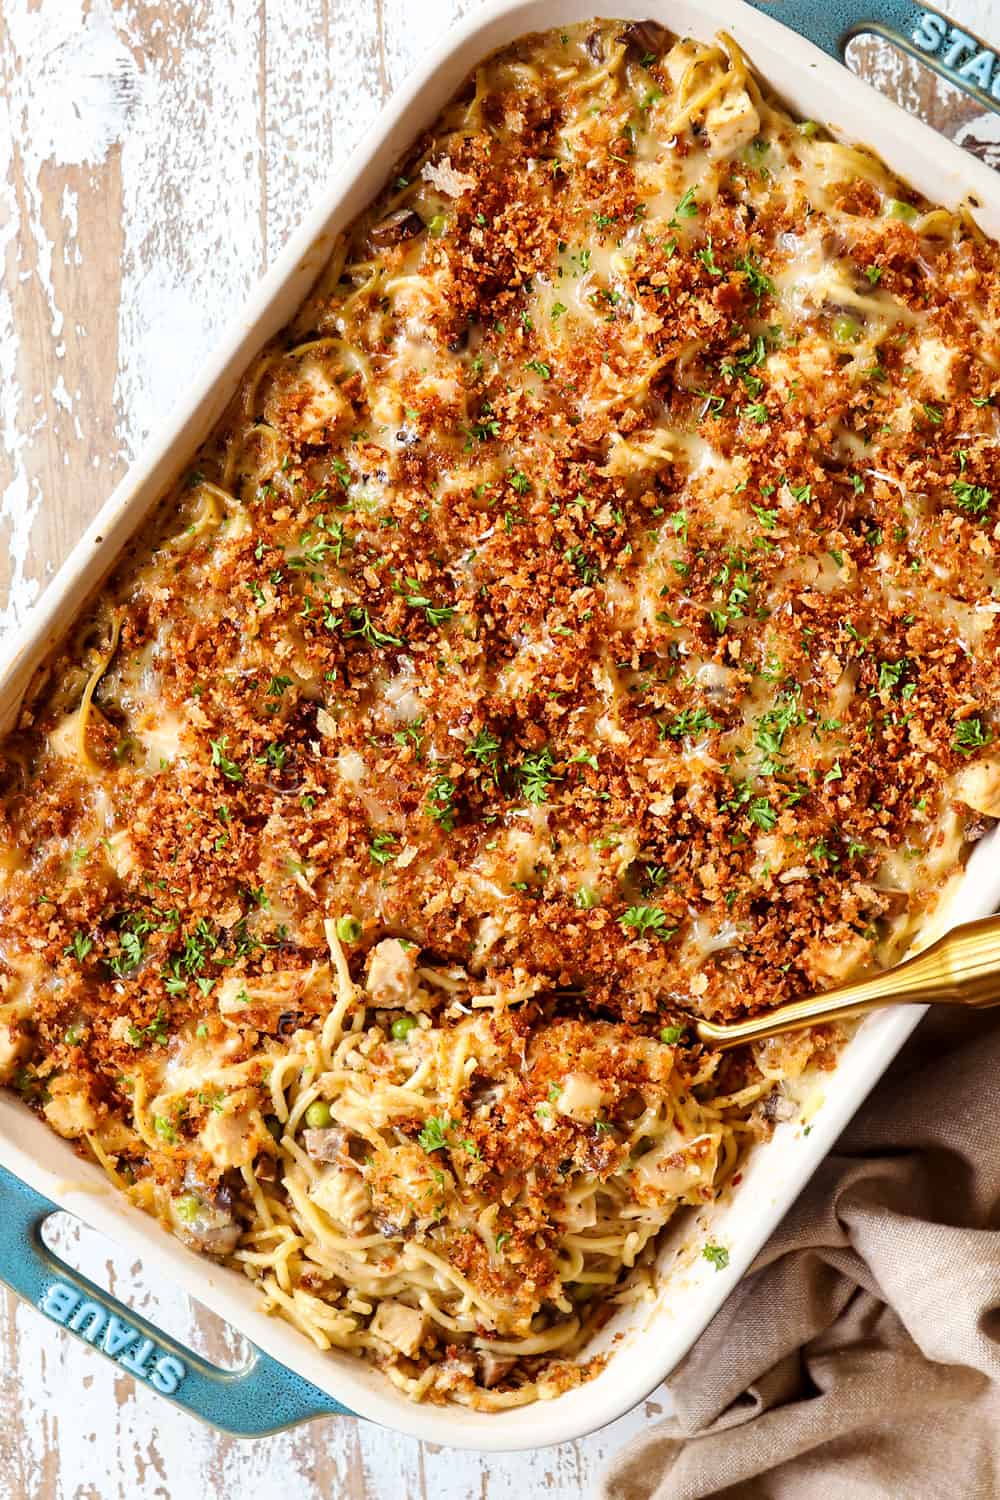 showing how to make turkey tetrazzini recipe by baking until the cheese is melted